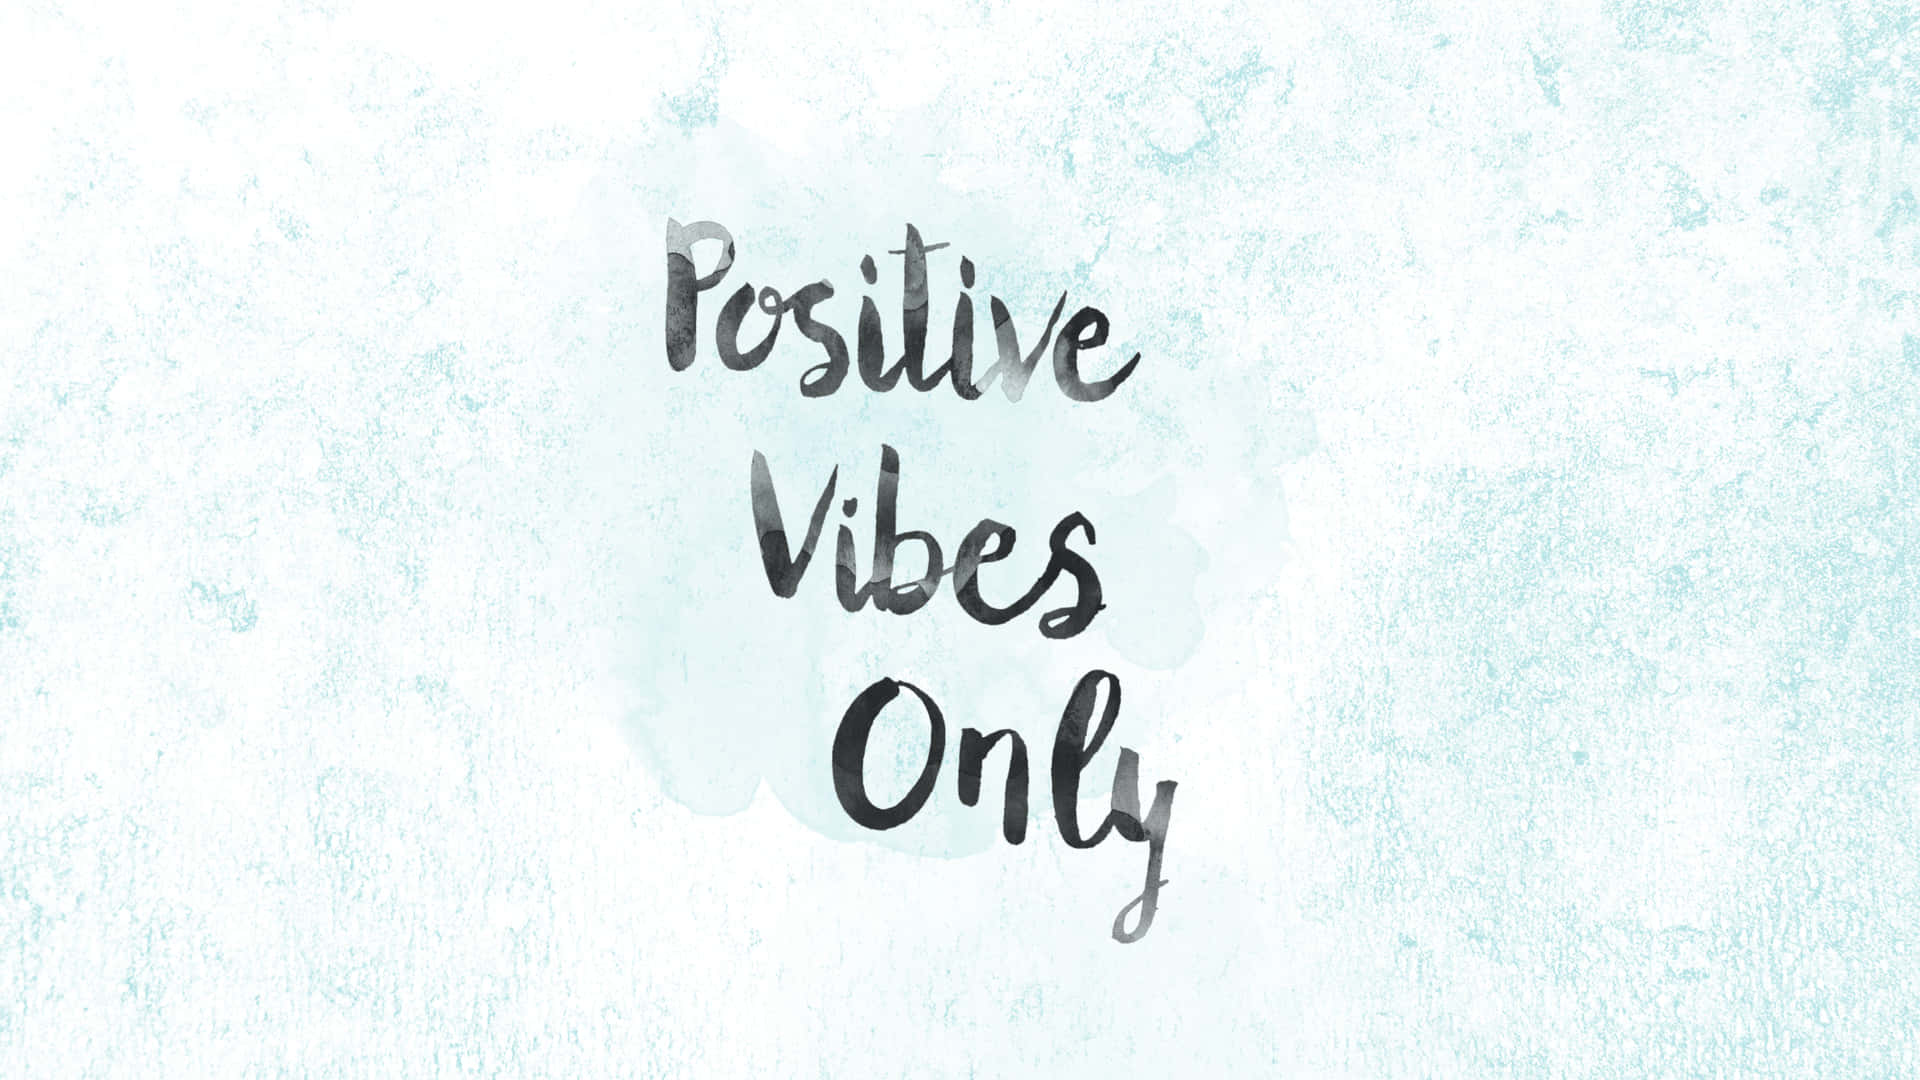 Spread positivity and create a beautiful life. Wallpaper